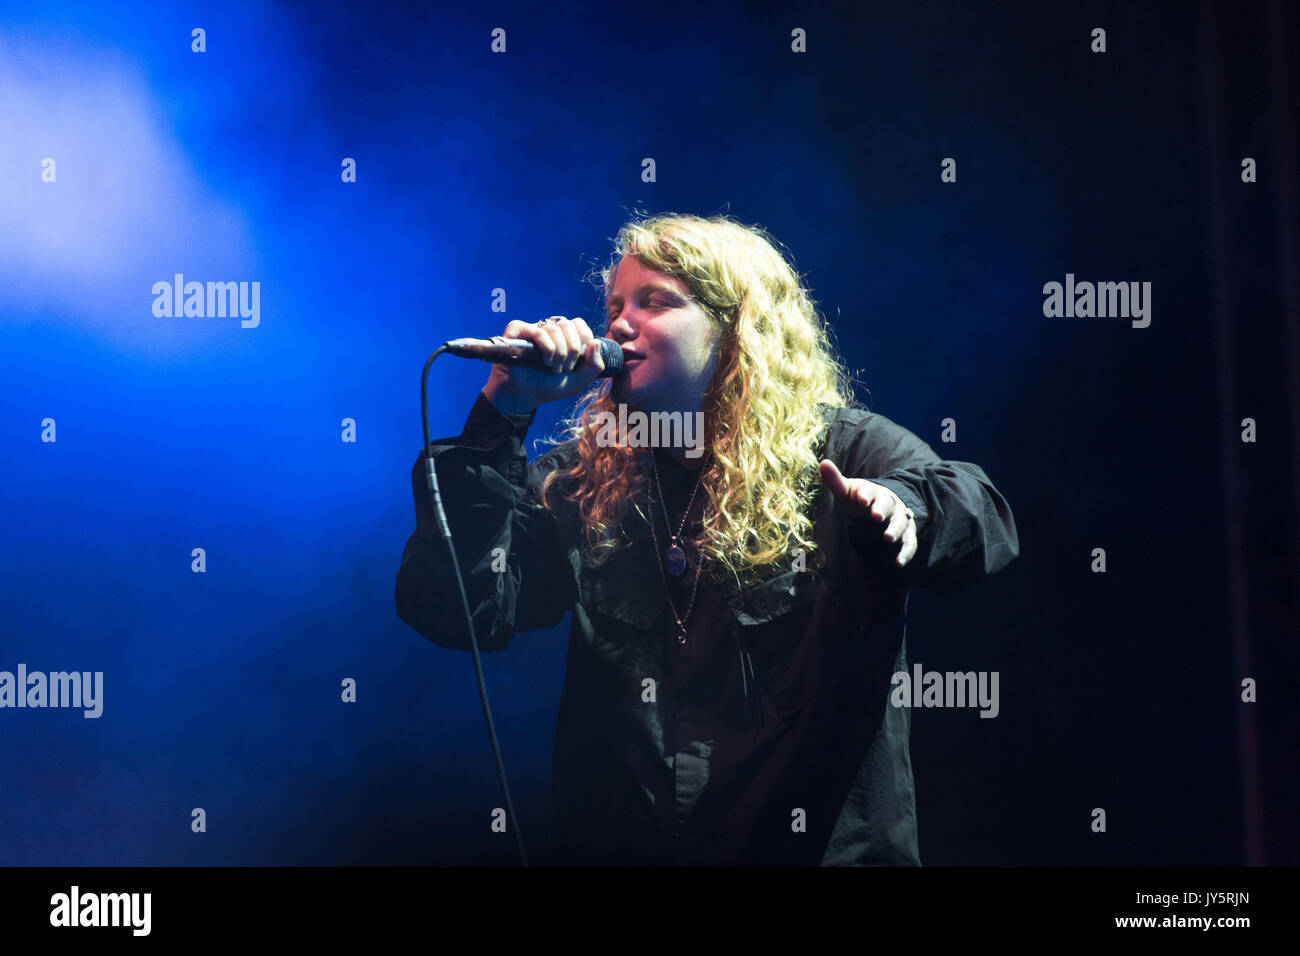 KATE TEMPEST, YOUNG, CONCERT, 2017: The artist now known as Kae Tempest plays on the Far Out Stage on Day One of the Green Man music festival in Glanusk Park, Brecon, Wales, UK on 18th August 2017. Credit: Rob Watkins/Alamy Live News.  INFO: Kae Tempest, a British spoken word artist and rapper, captivates audiences with their powerful storytelling and lyrical prowess. Their albums like 'Everybody Down' and 'The Book of Traps and Lessons' showcase their ability to blend poetry, hip-hop, and social commentary, earning critical acclaim and a devoted following. Stock Photo